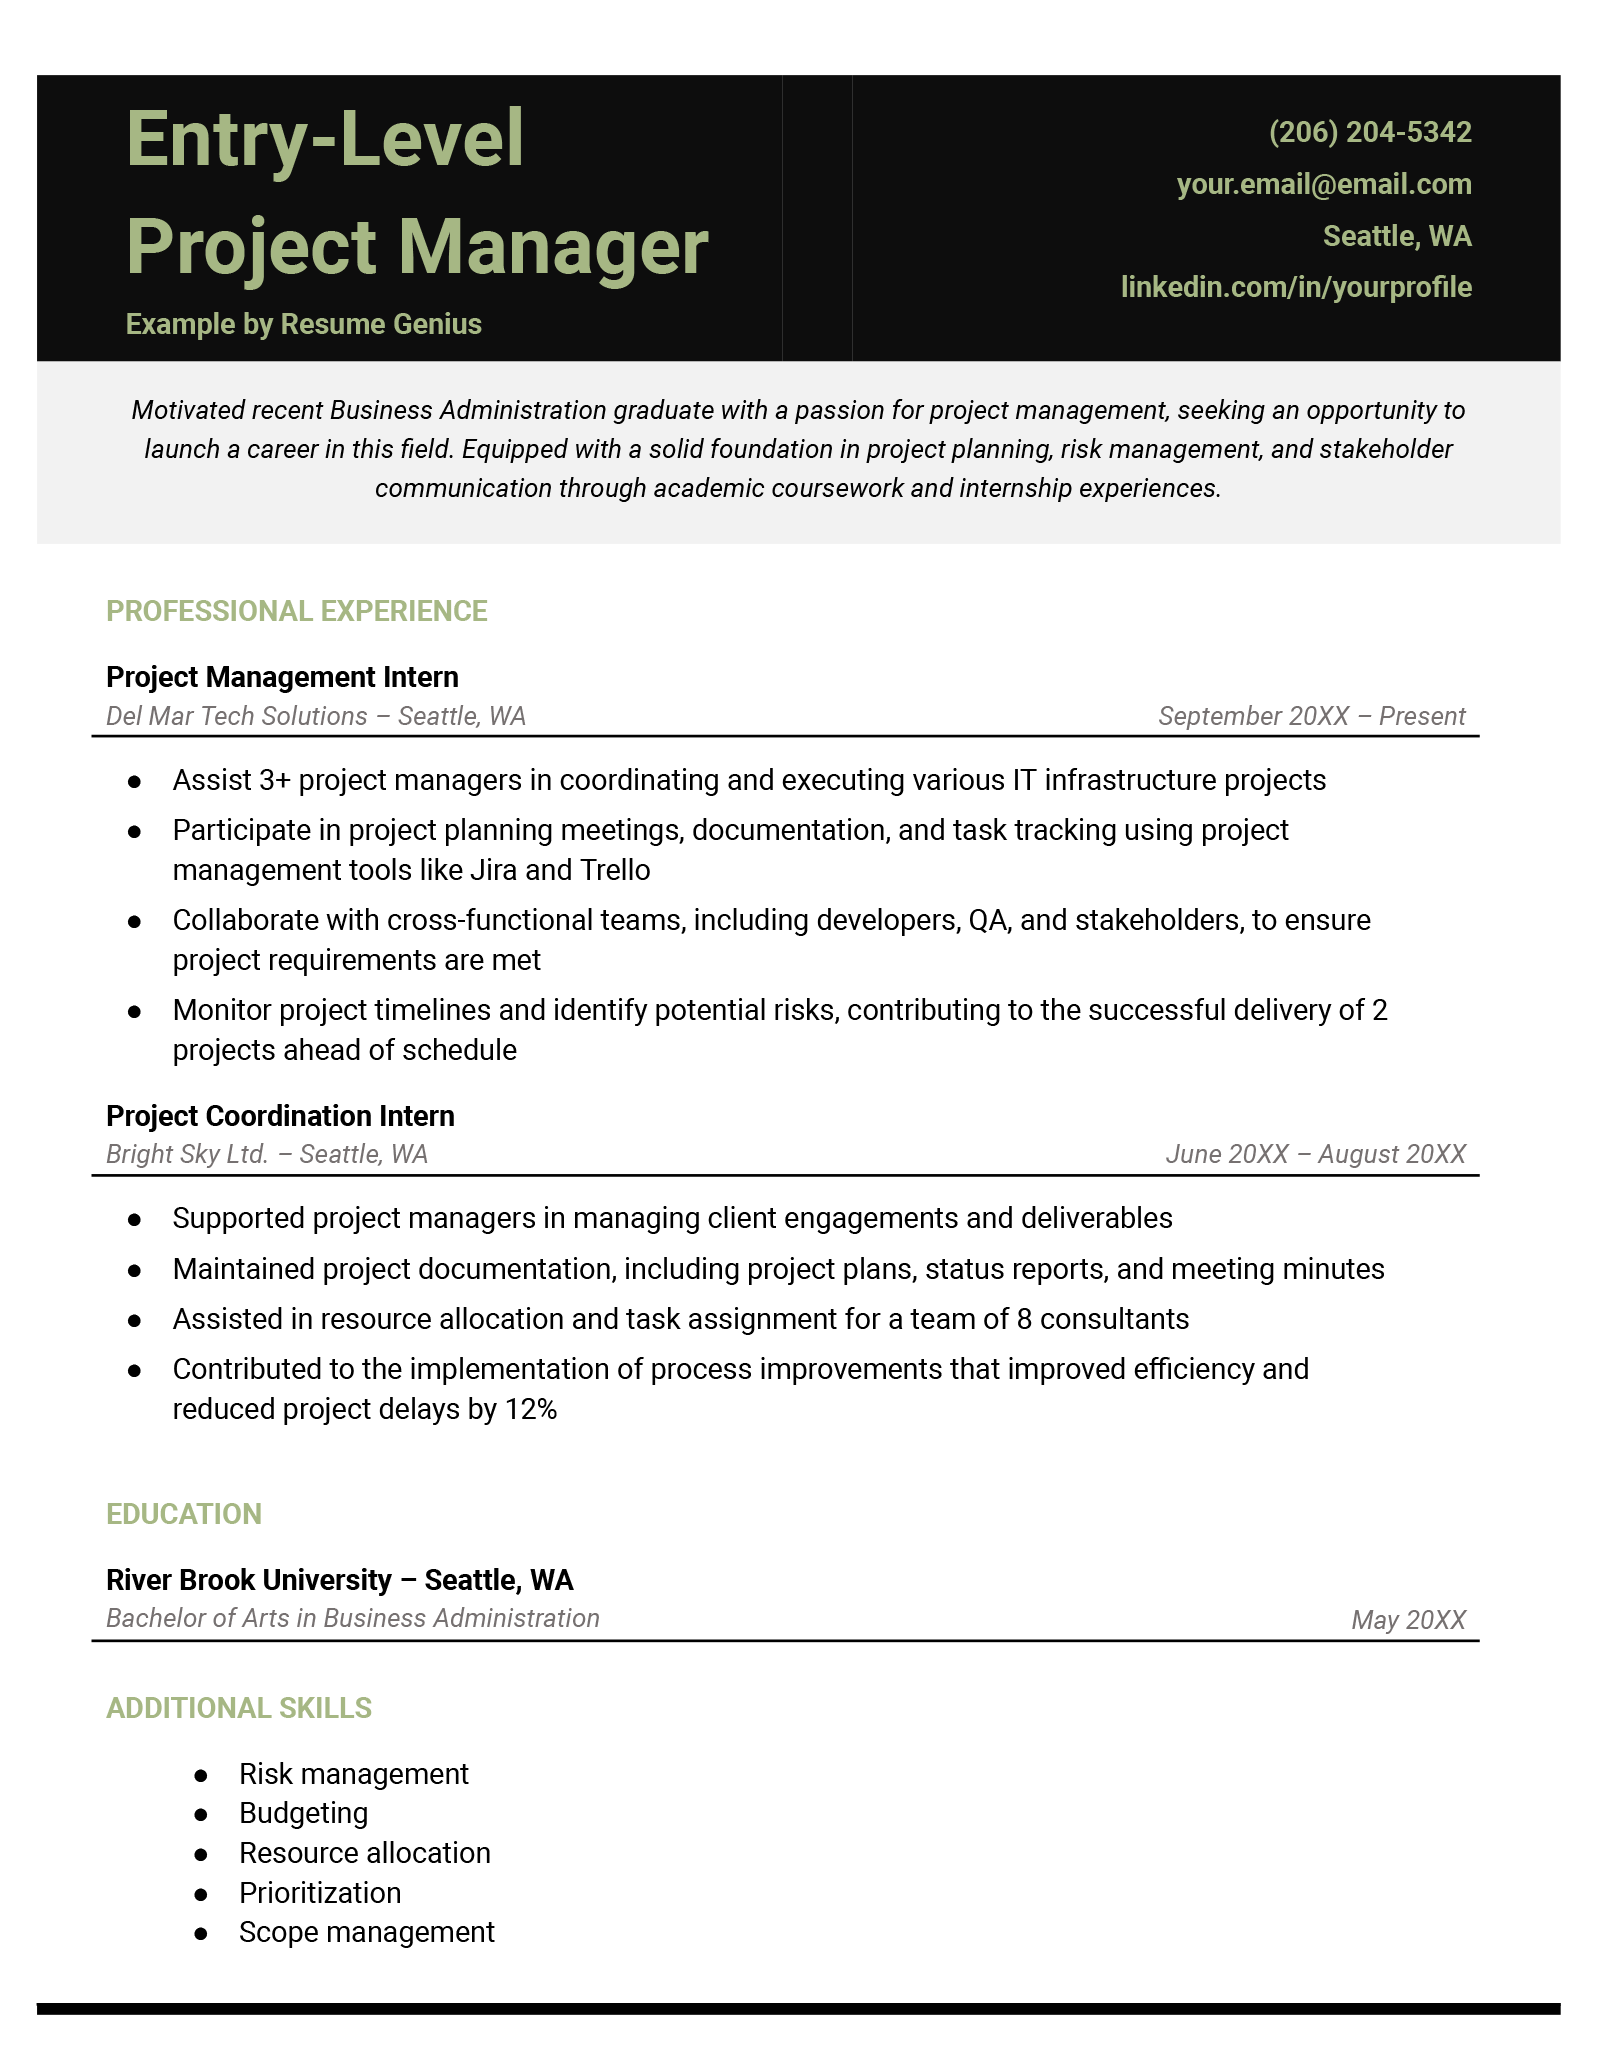 An example resume for an entry-level project manager.